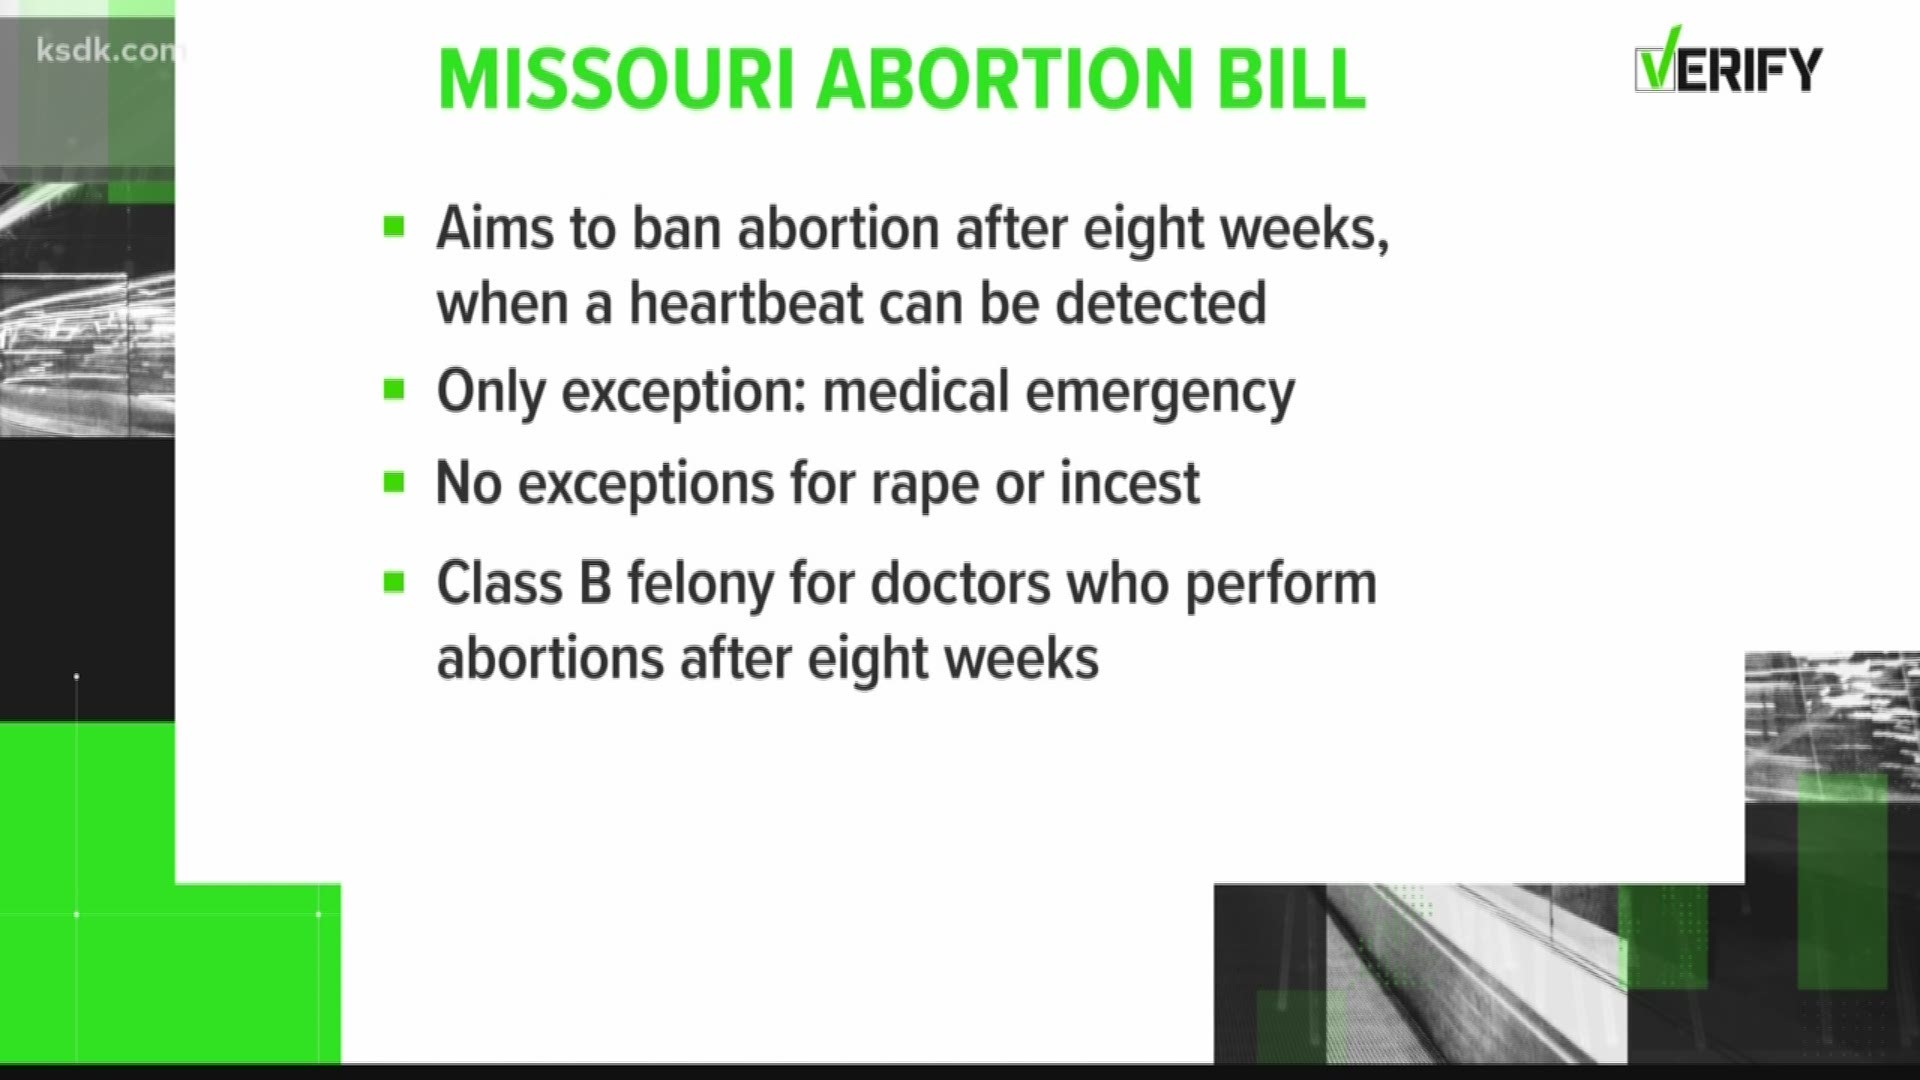 Alabama's new abortion law is being called the most restrictive in the country. How does Missouri's proposed bill compare?